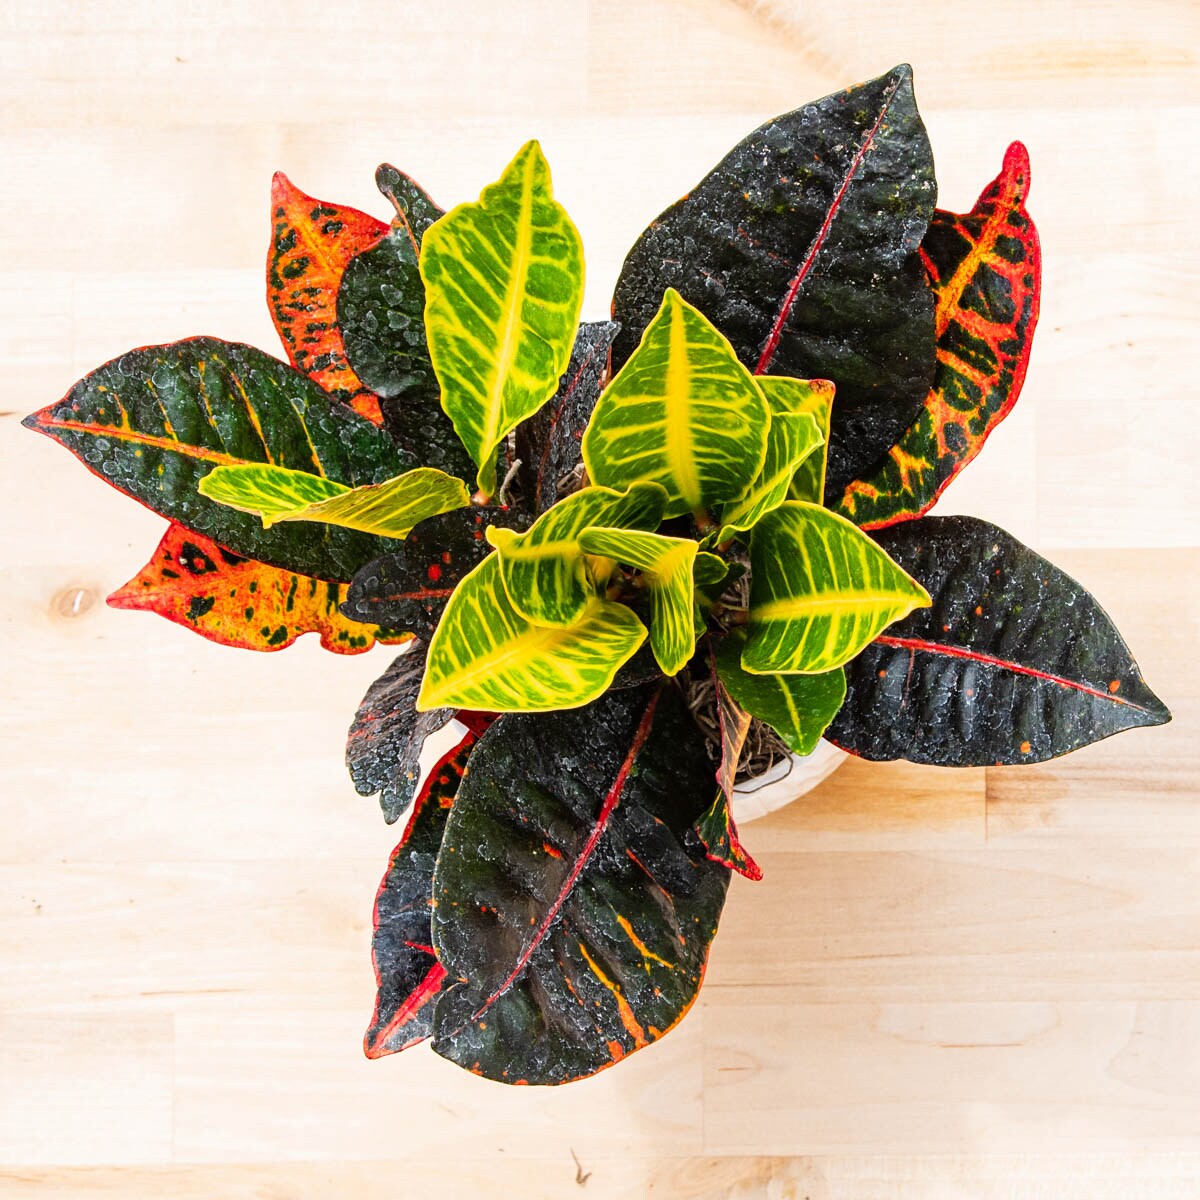 Spring Hill Nurseries Petra Croton Tropical Houseplant House Plant in 4 ...